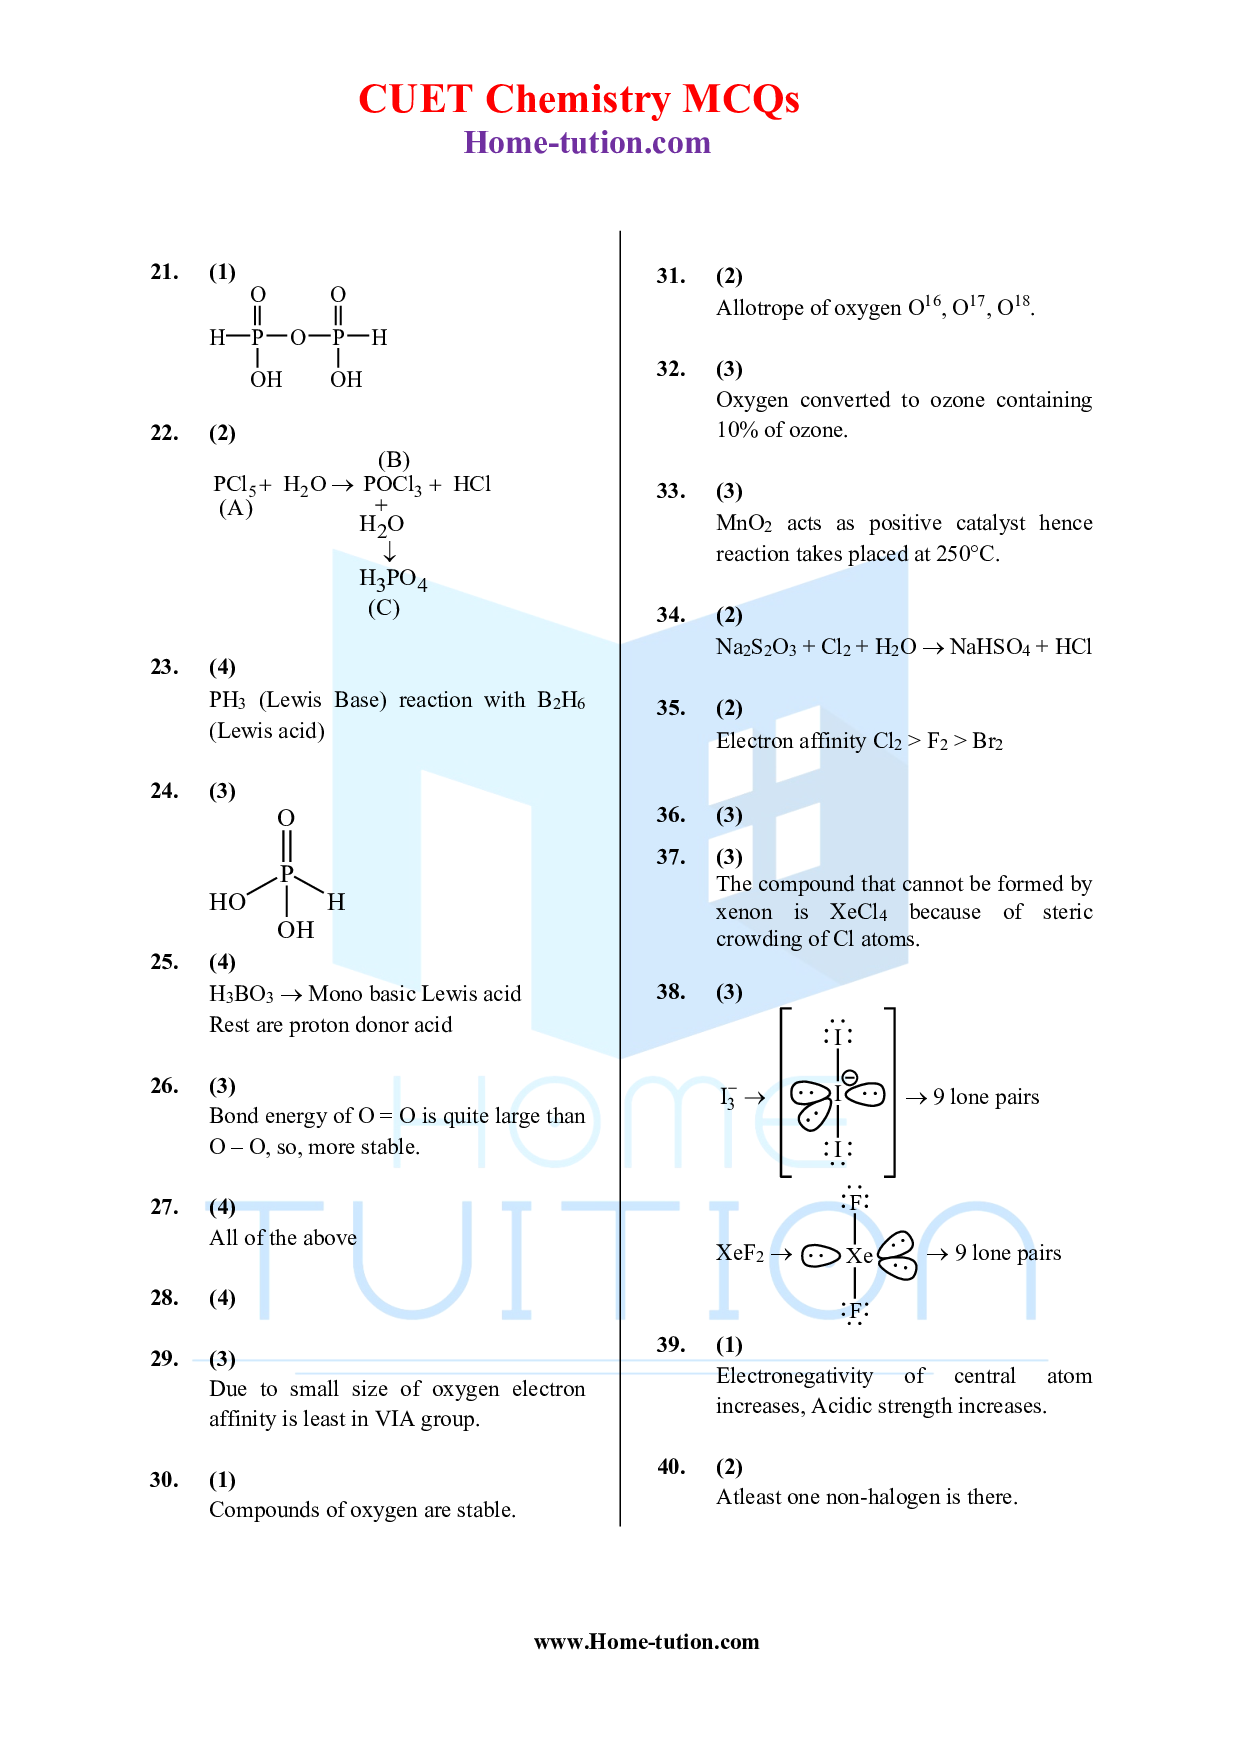 CUET MCQ Questions For Chapter-07 P Block Elements